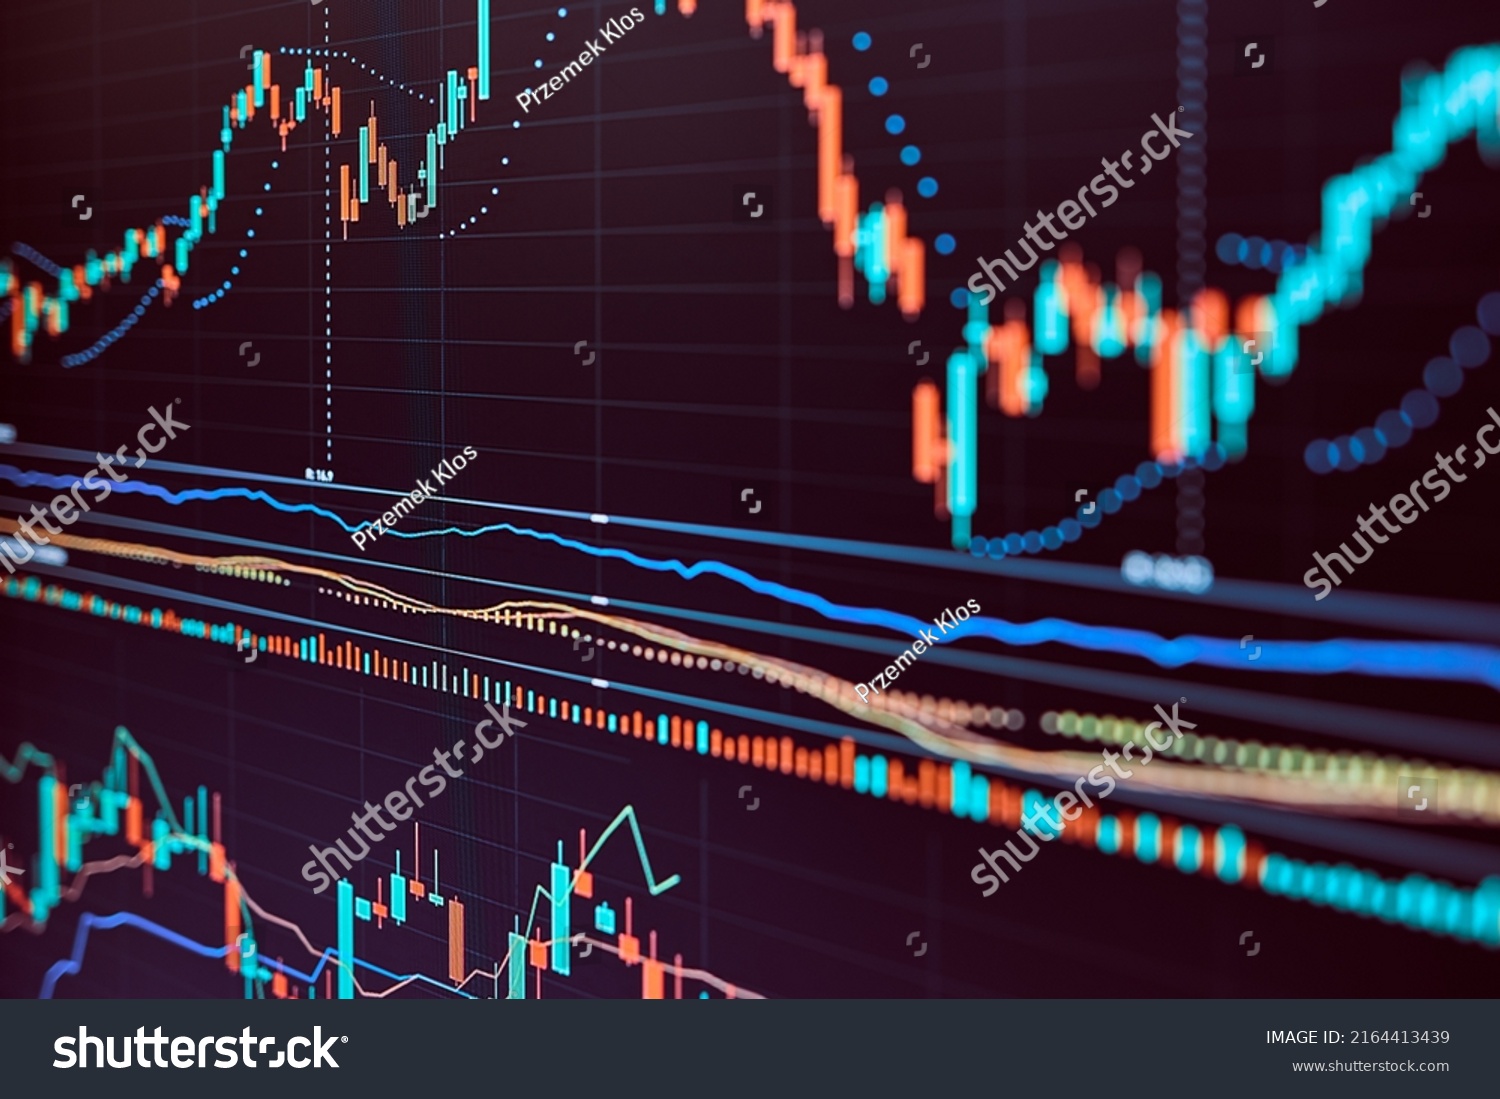 Trading online. Investing stocks. Speculation on market. Candlestick chart. Forex market. Buy cryptocurrency. Earn money. Stop loss. Take profit. Market analysis. Finance business concept background #2164413439